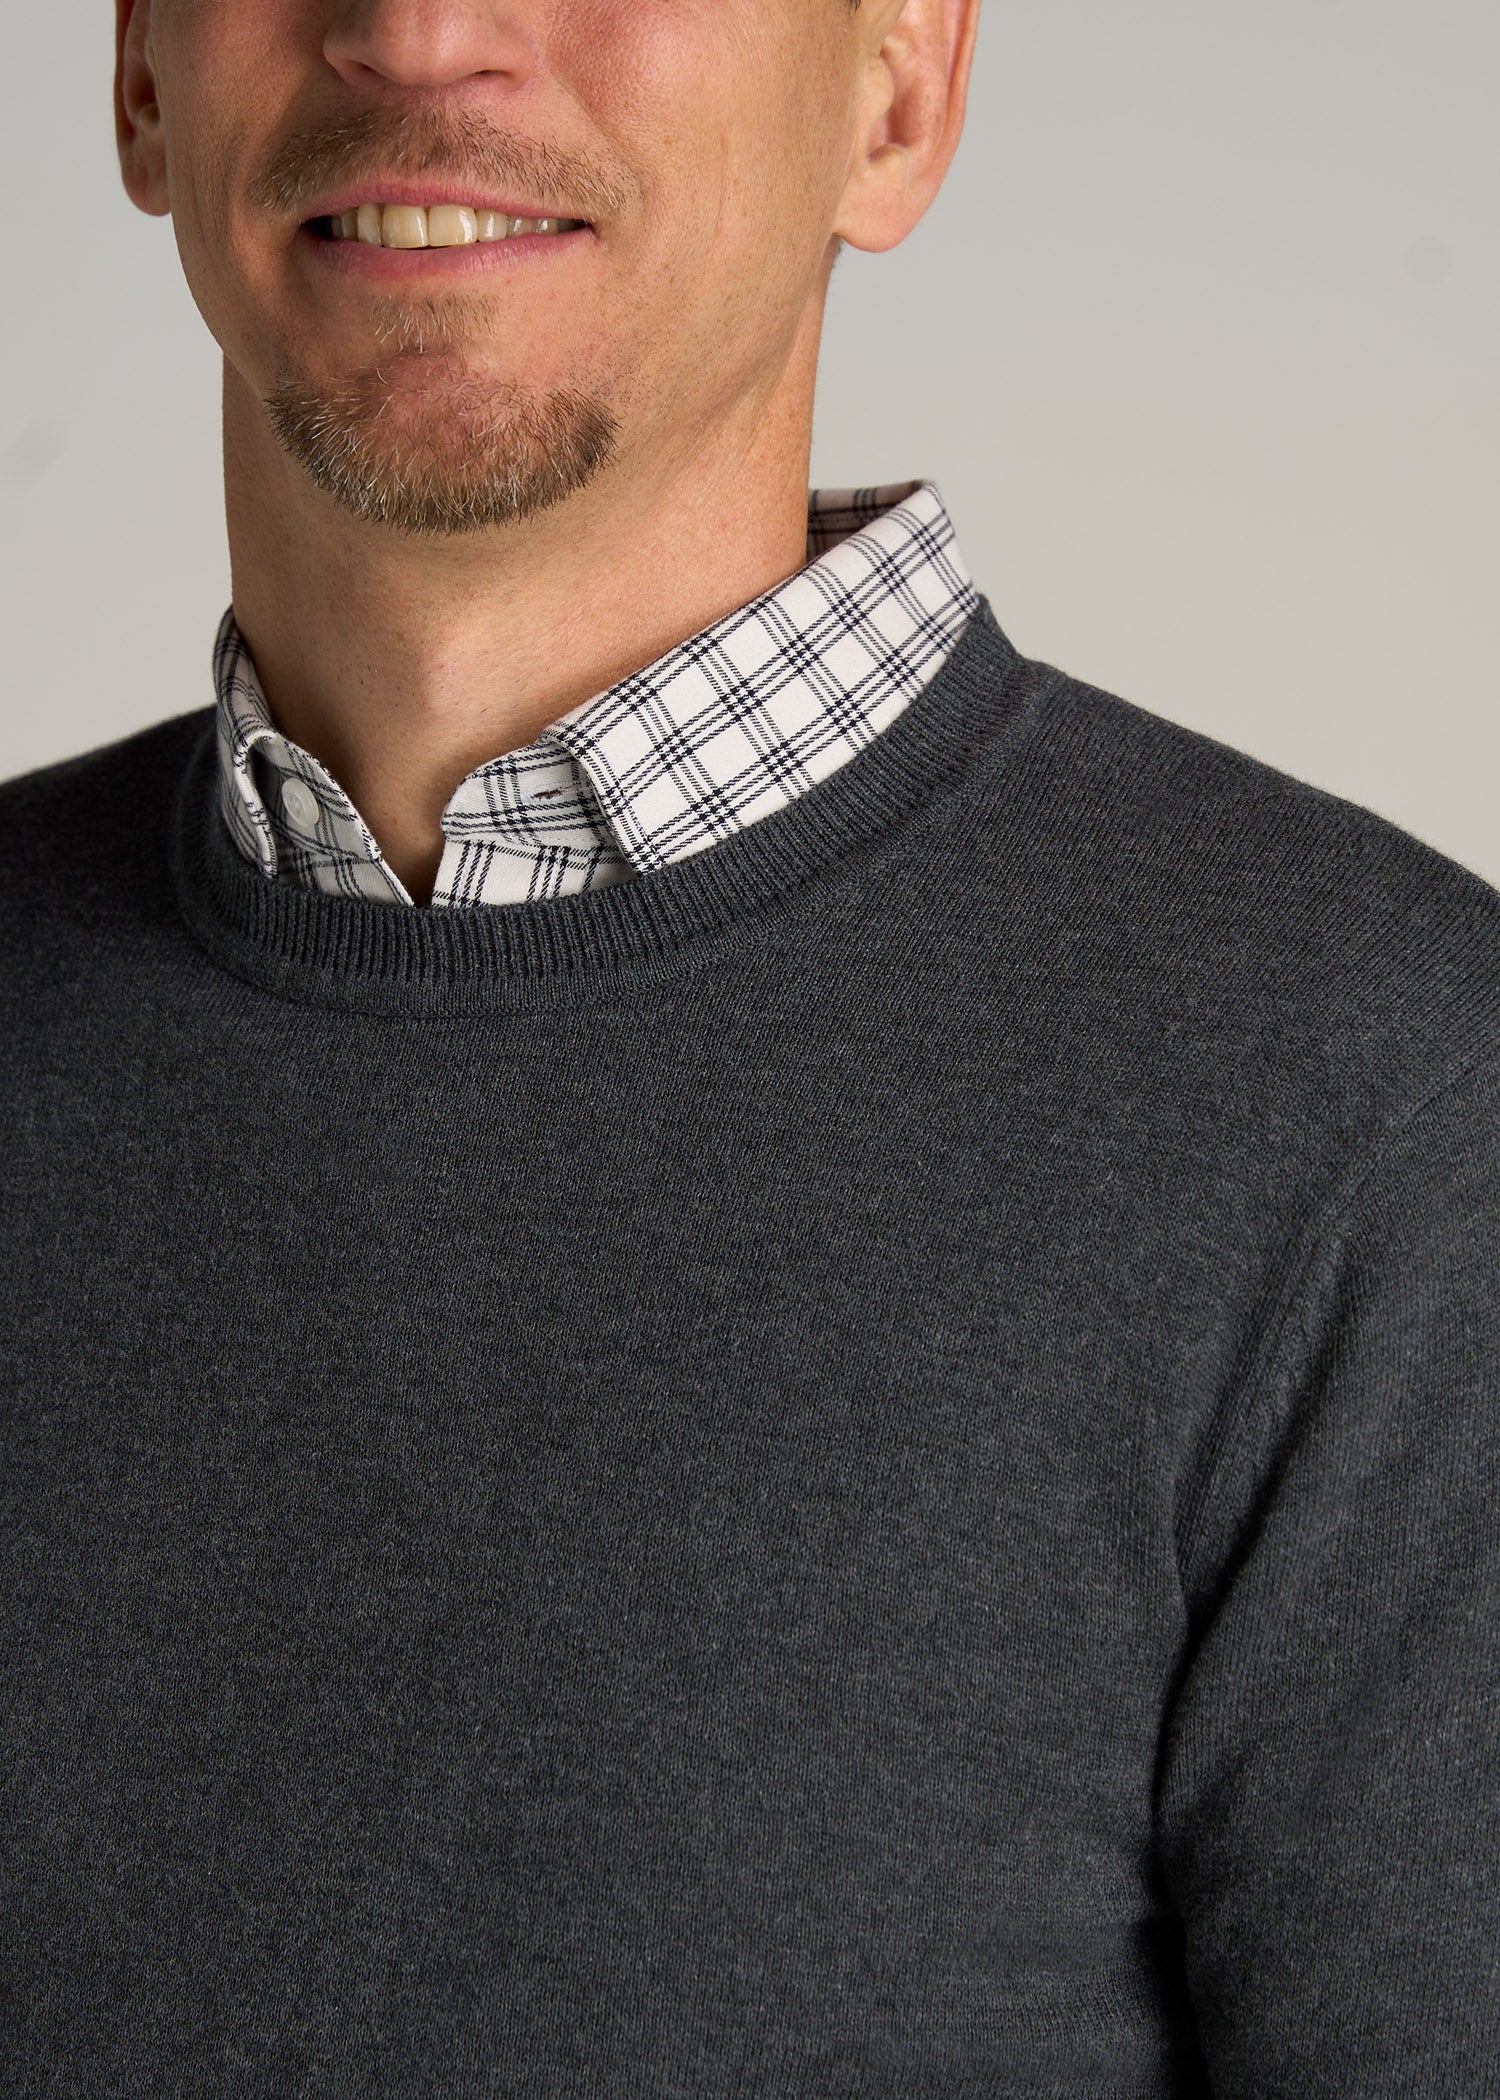    American-Tall-Men-Everyday-Crewneck-Sweater-Charcoal-detail